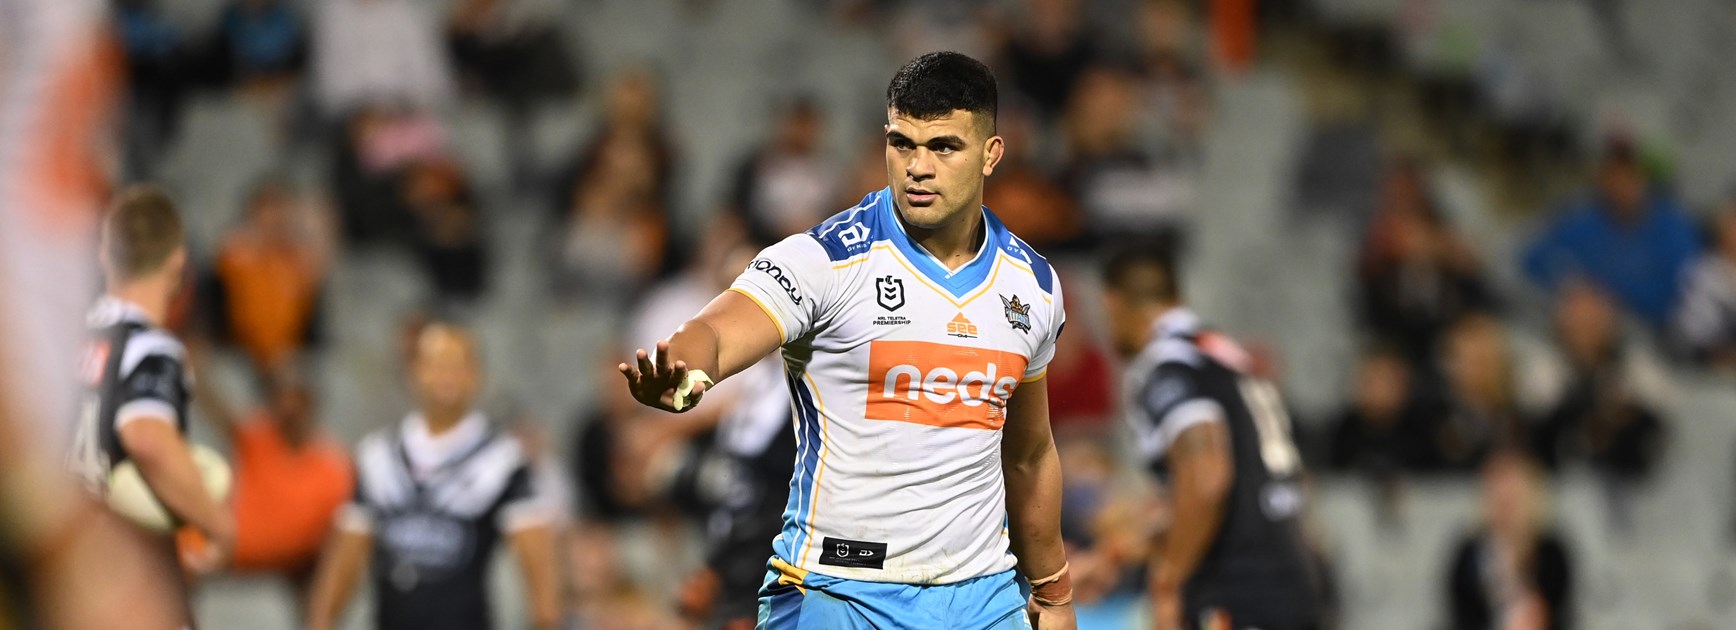 Fifita, Peachey charged by Match Review Committee